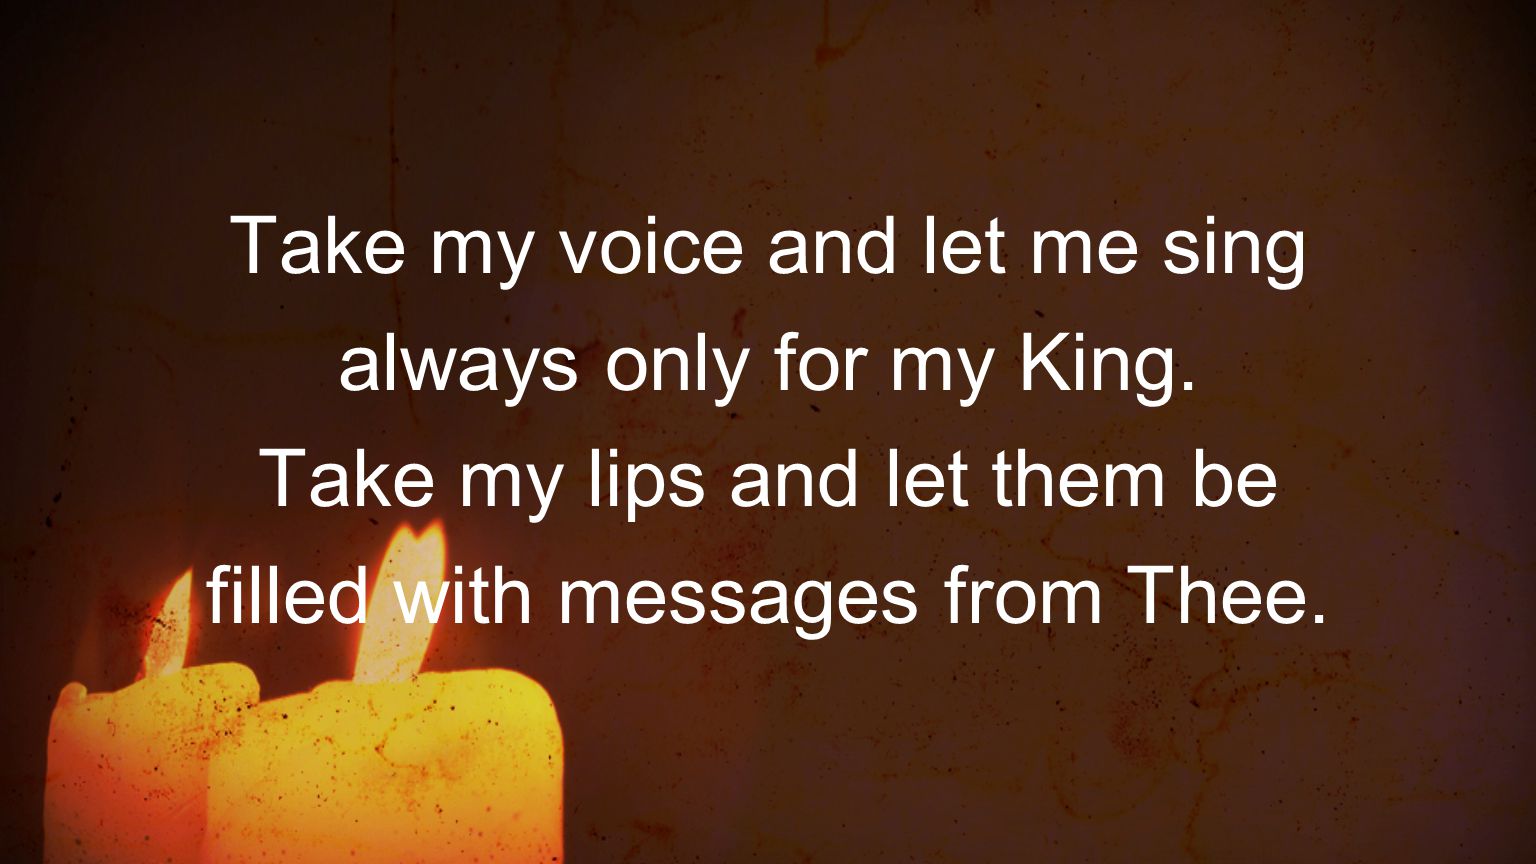 Take my voice and let me sing always only for my King.